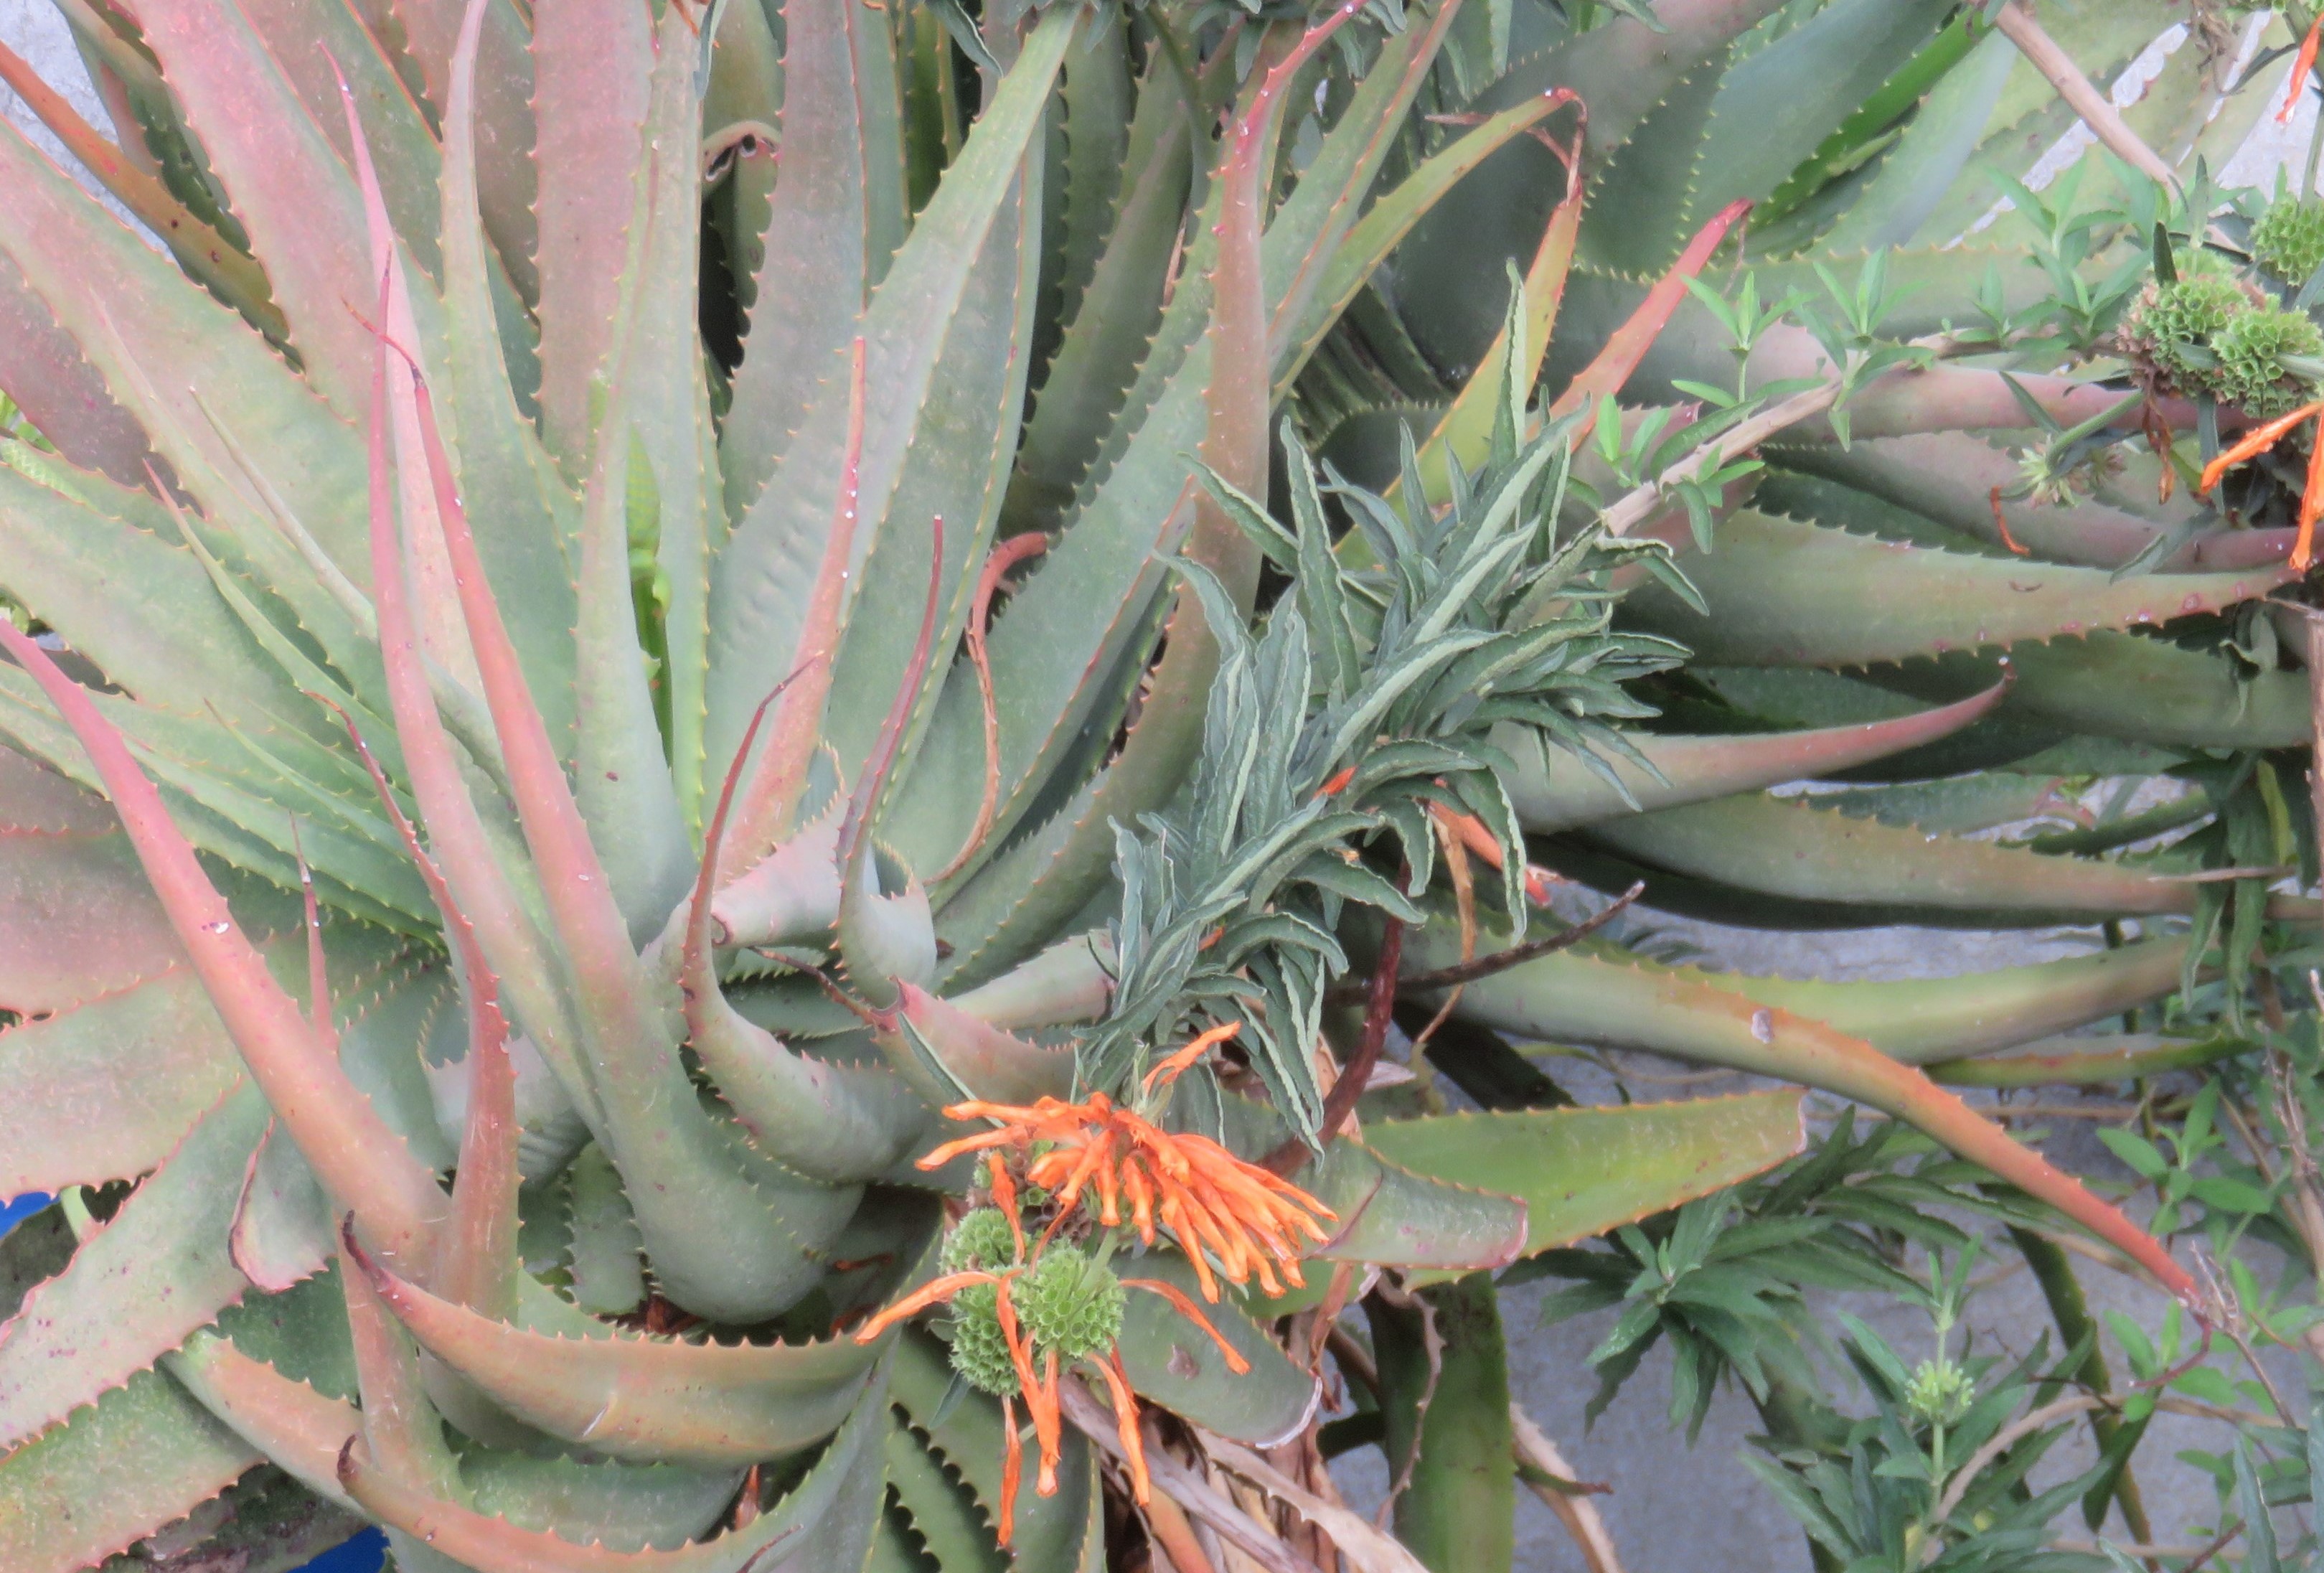 The aloe's own internal medicine, a sunscreen of red coloring which build up in the drought of our hot summers.